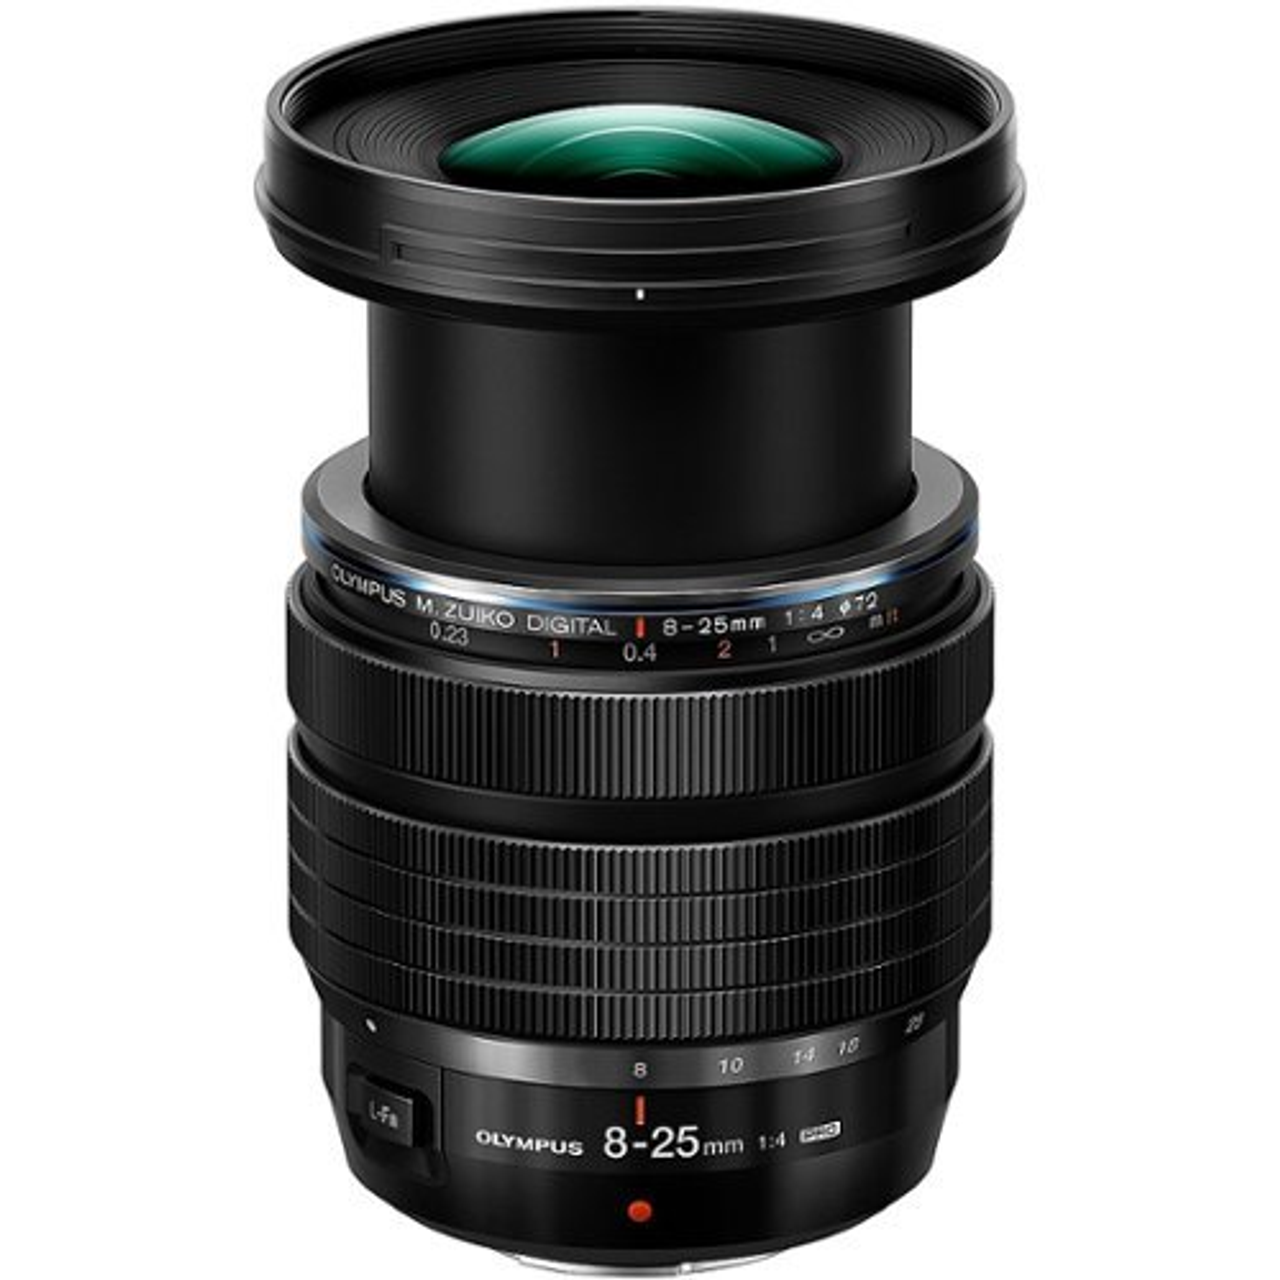 M.ZUIKO DIGITAL 8-25 mm f/4-22 Ultra Wide Angle Zoom Lens For Olympus Micro Four Thirds Mirrorless Cameras - Black